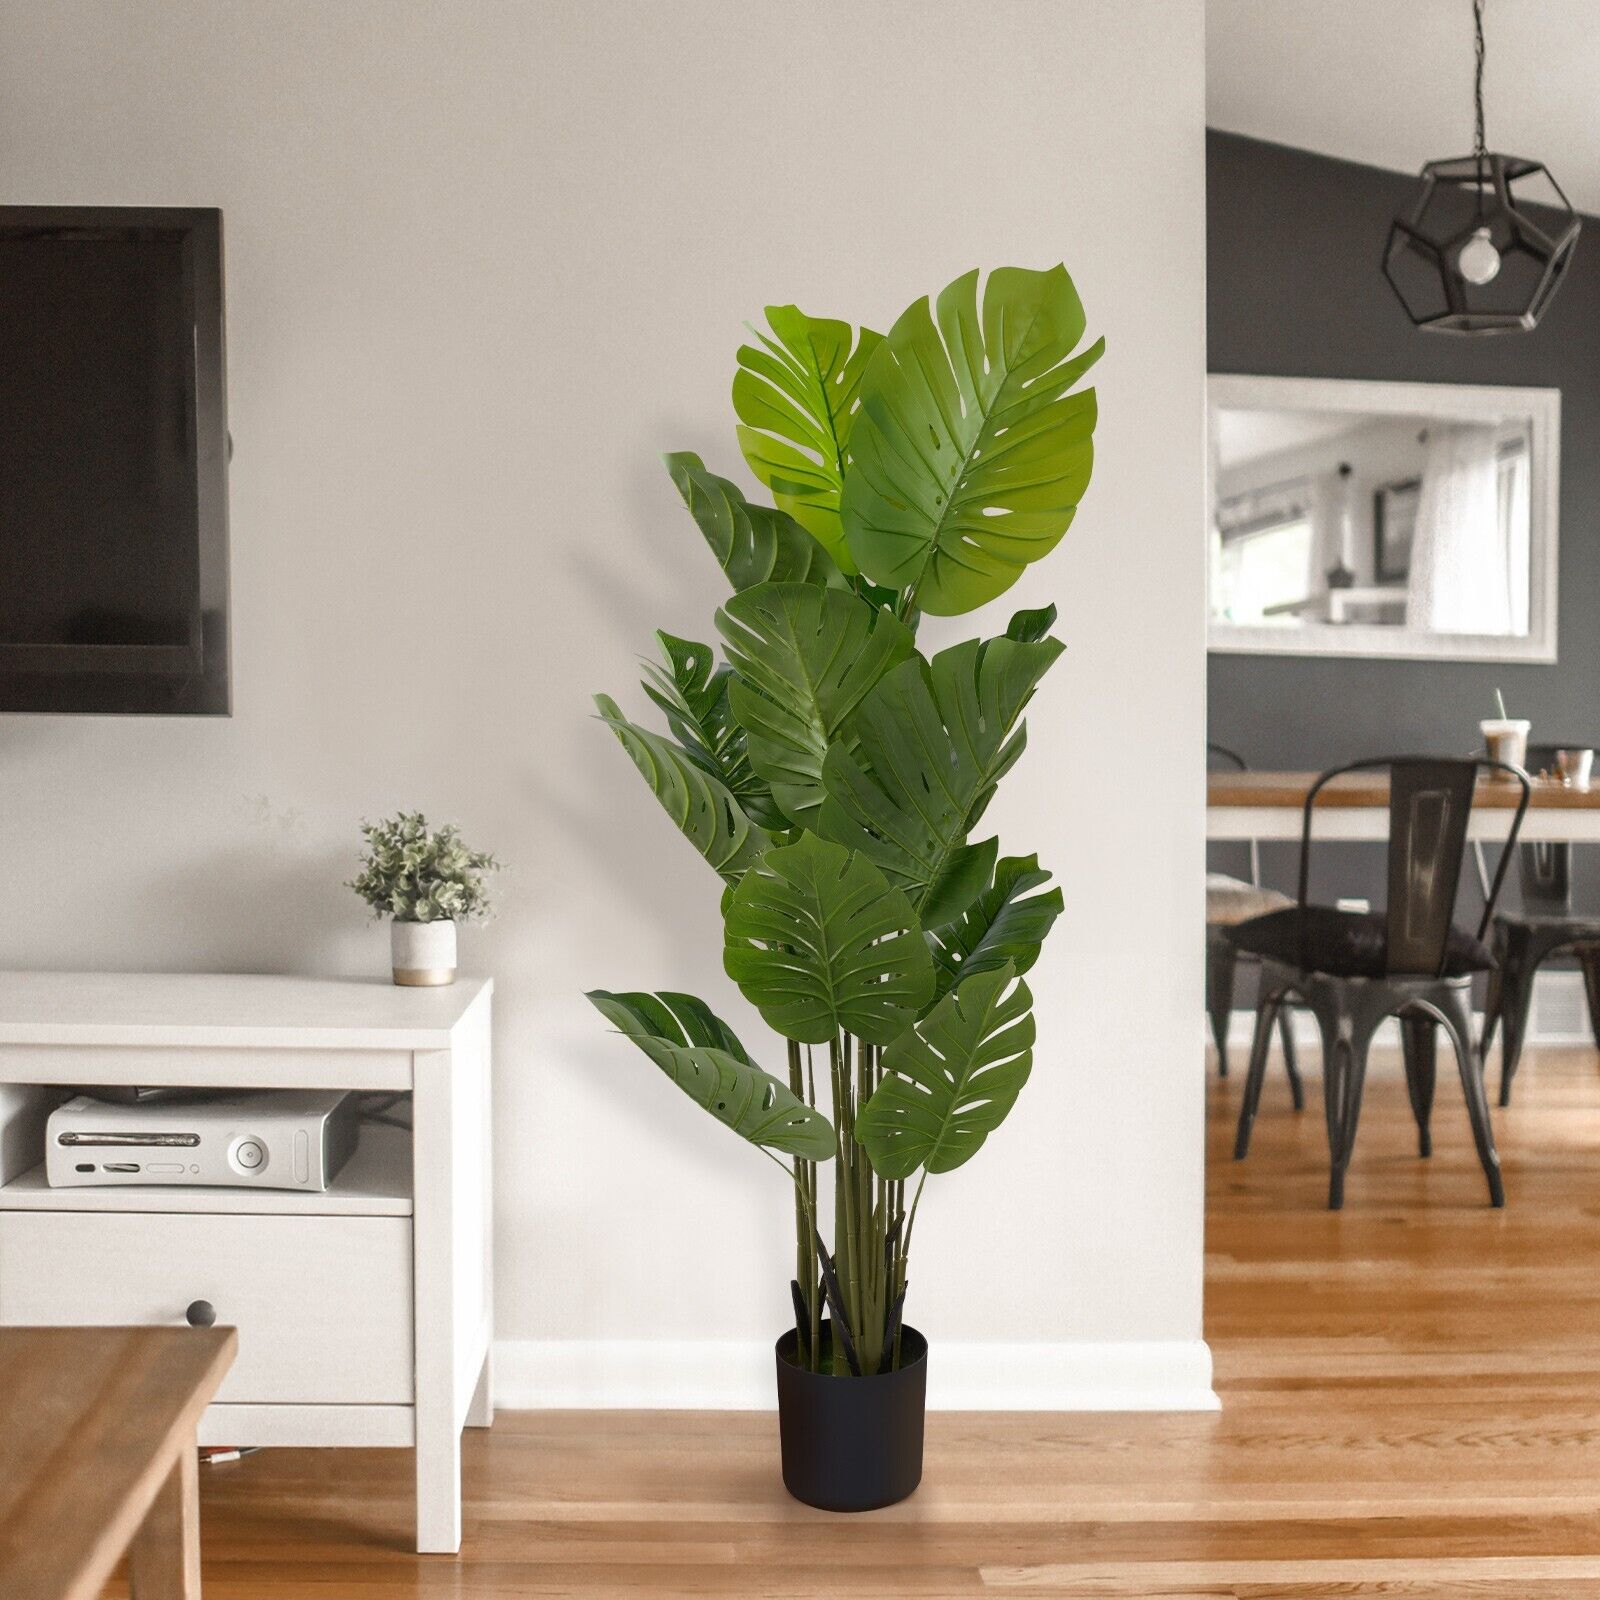 5' Artificial Monstera Plant in Pot Tree with 15 Leaves